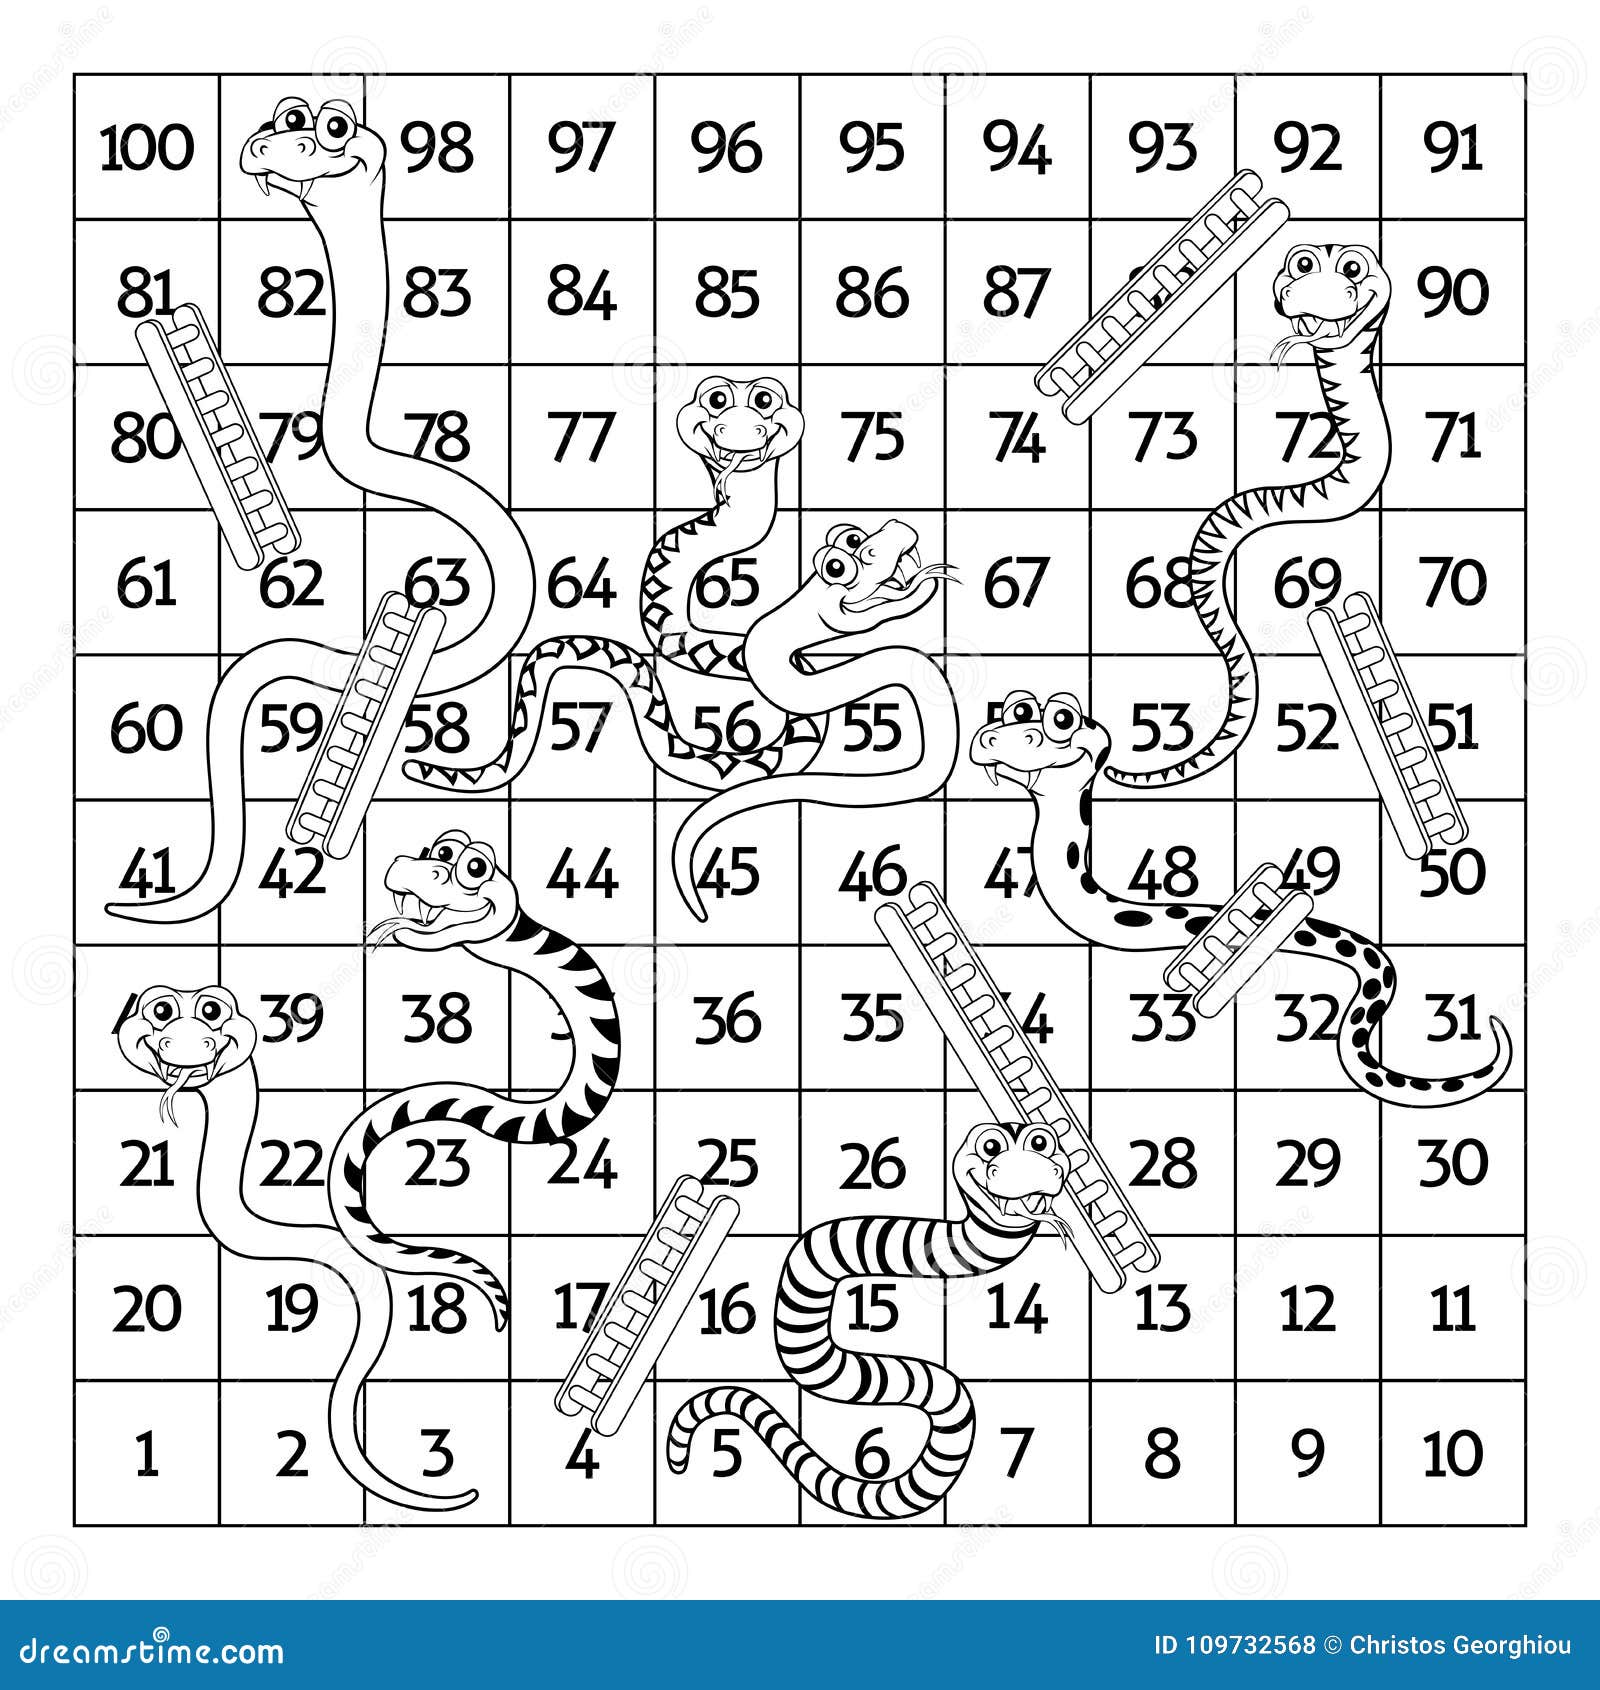 snakes and ladders black and white